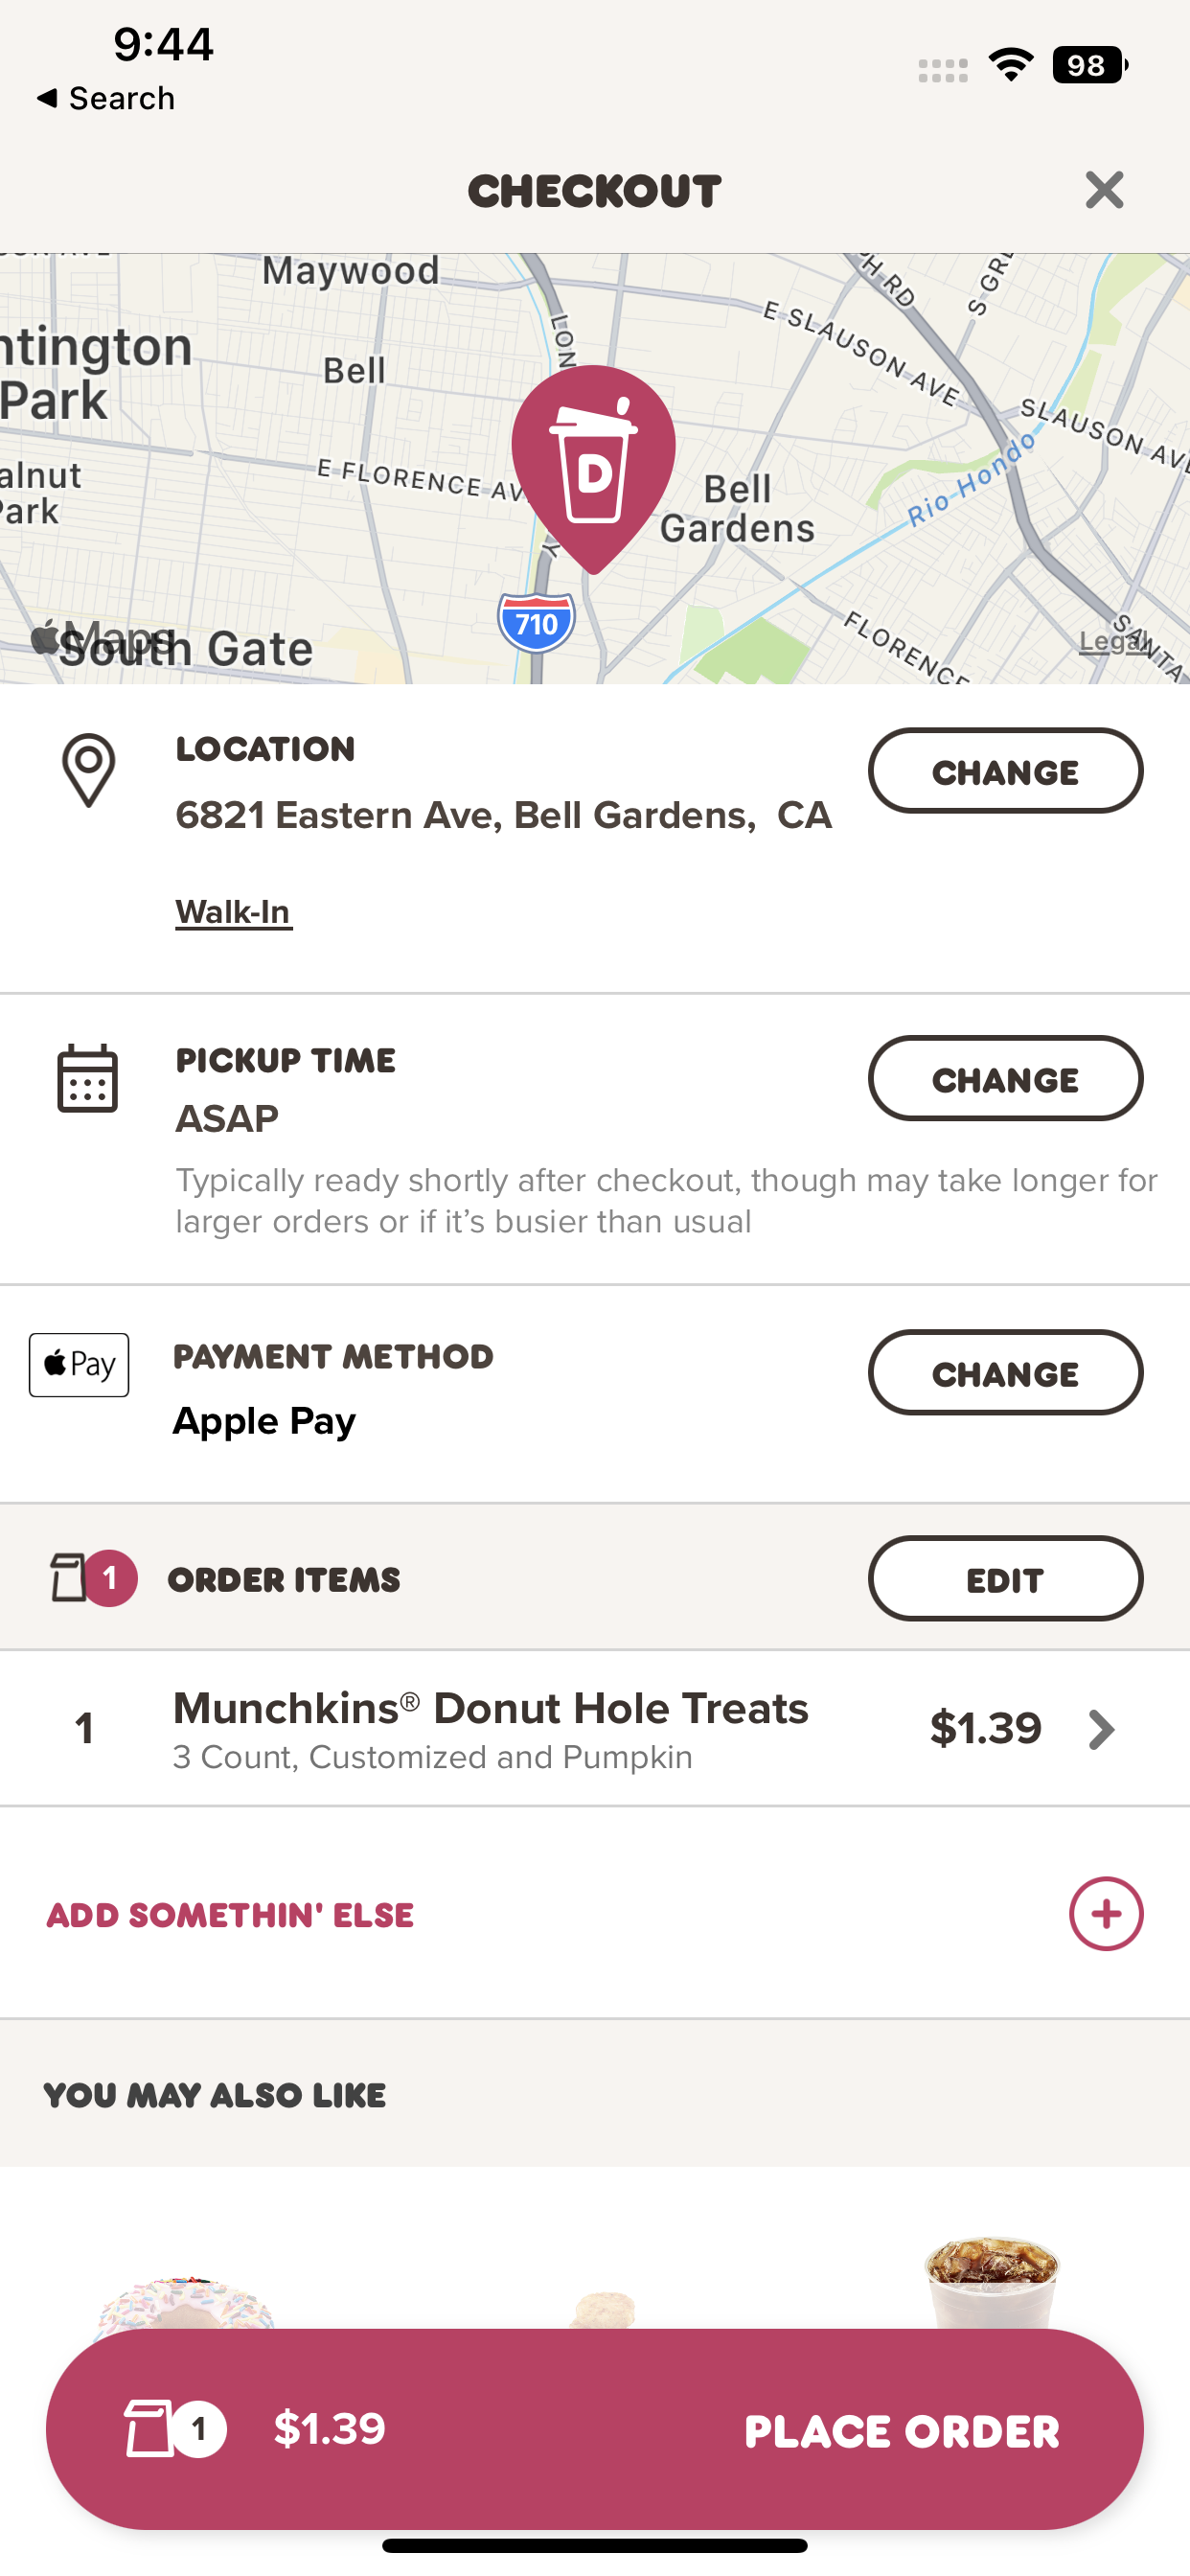 Dunkin' accepts Apple Pay in its app.